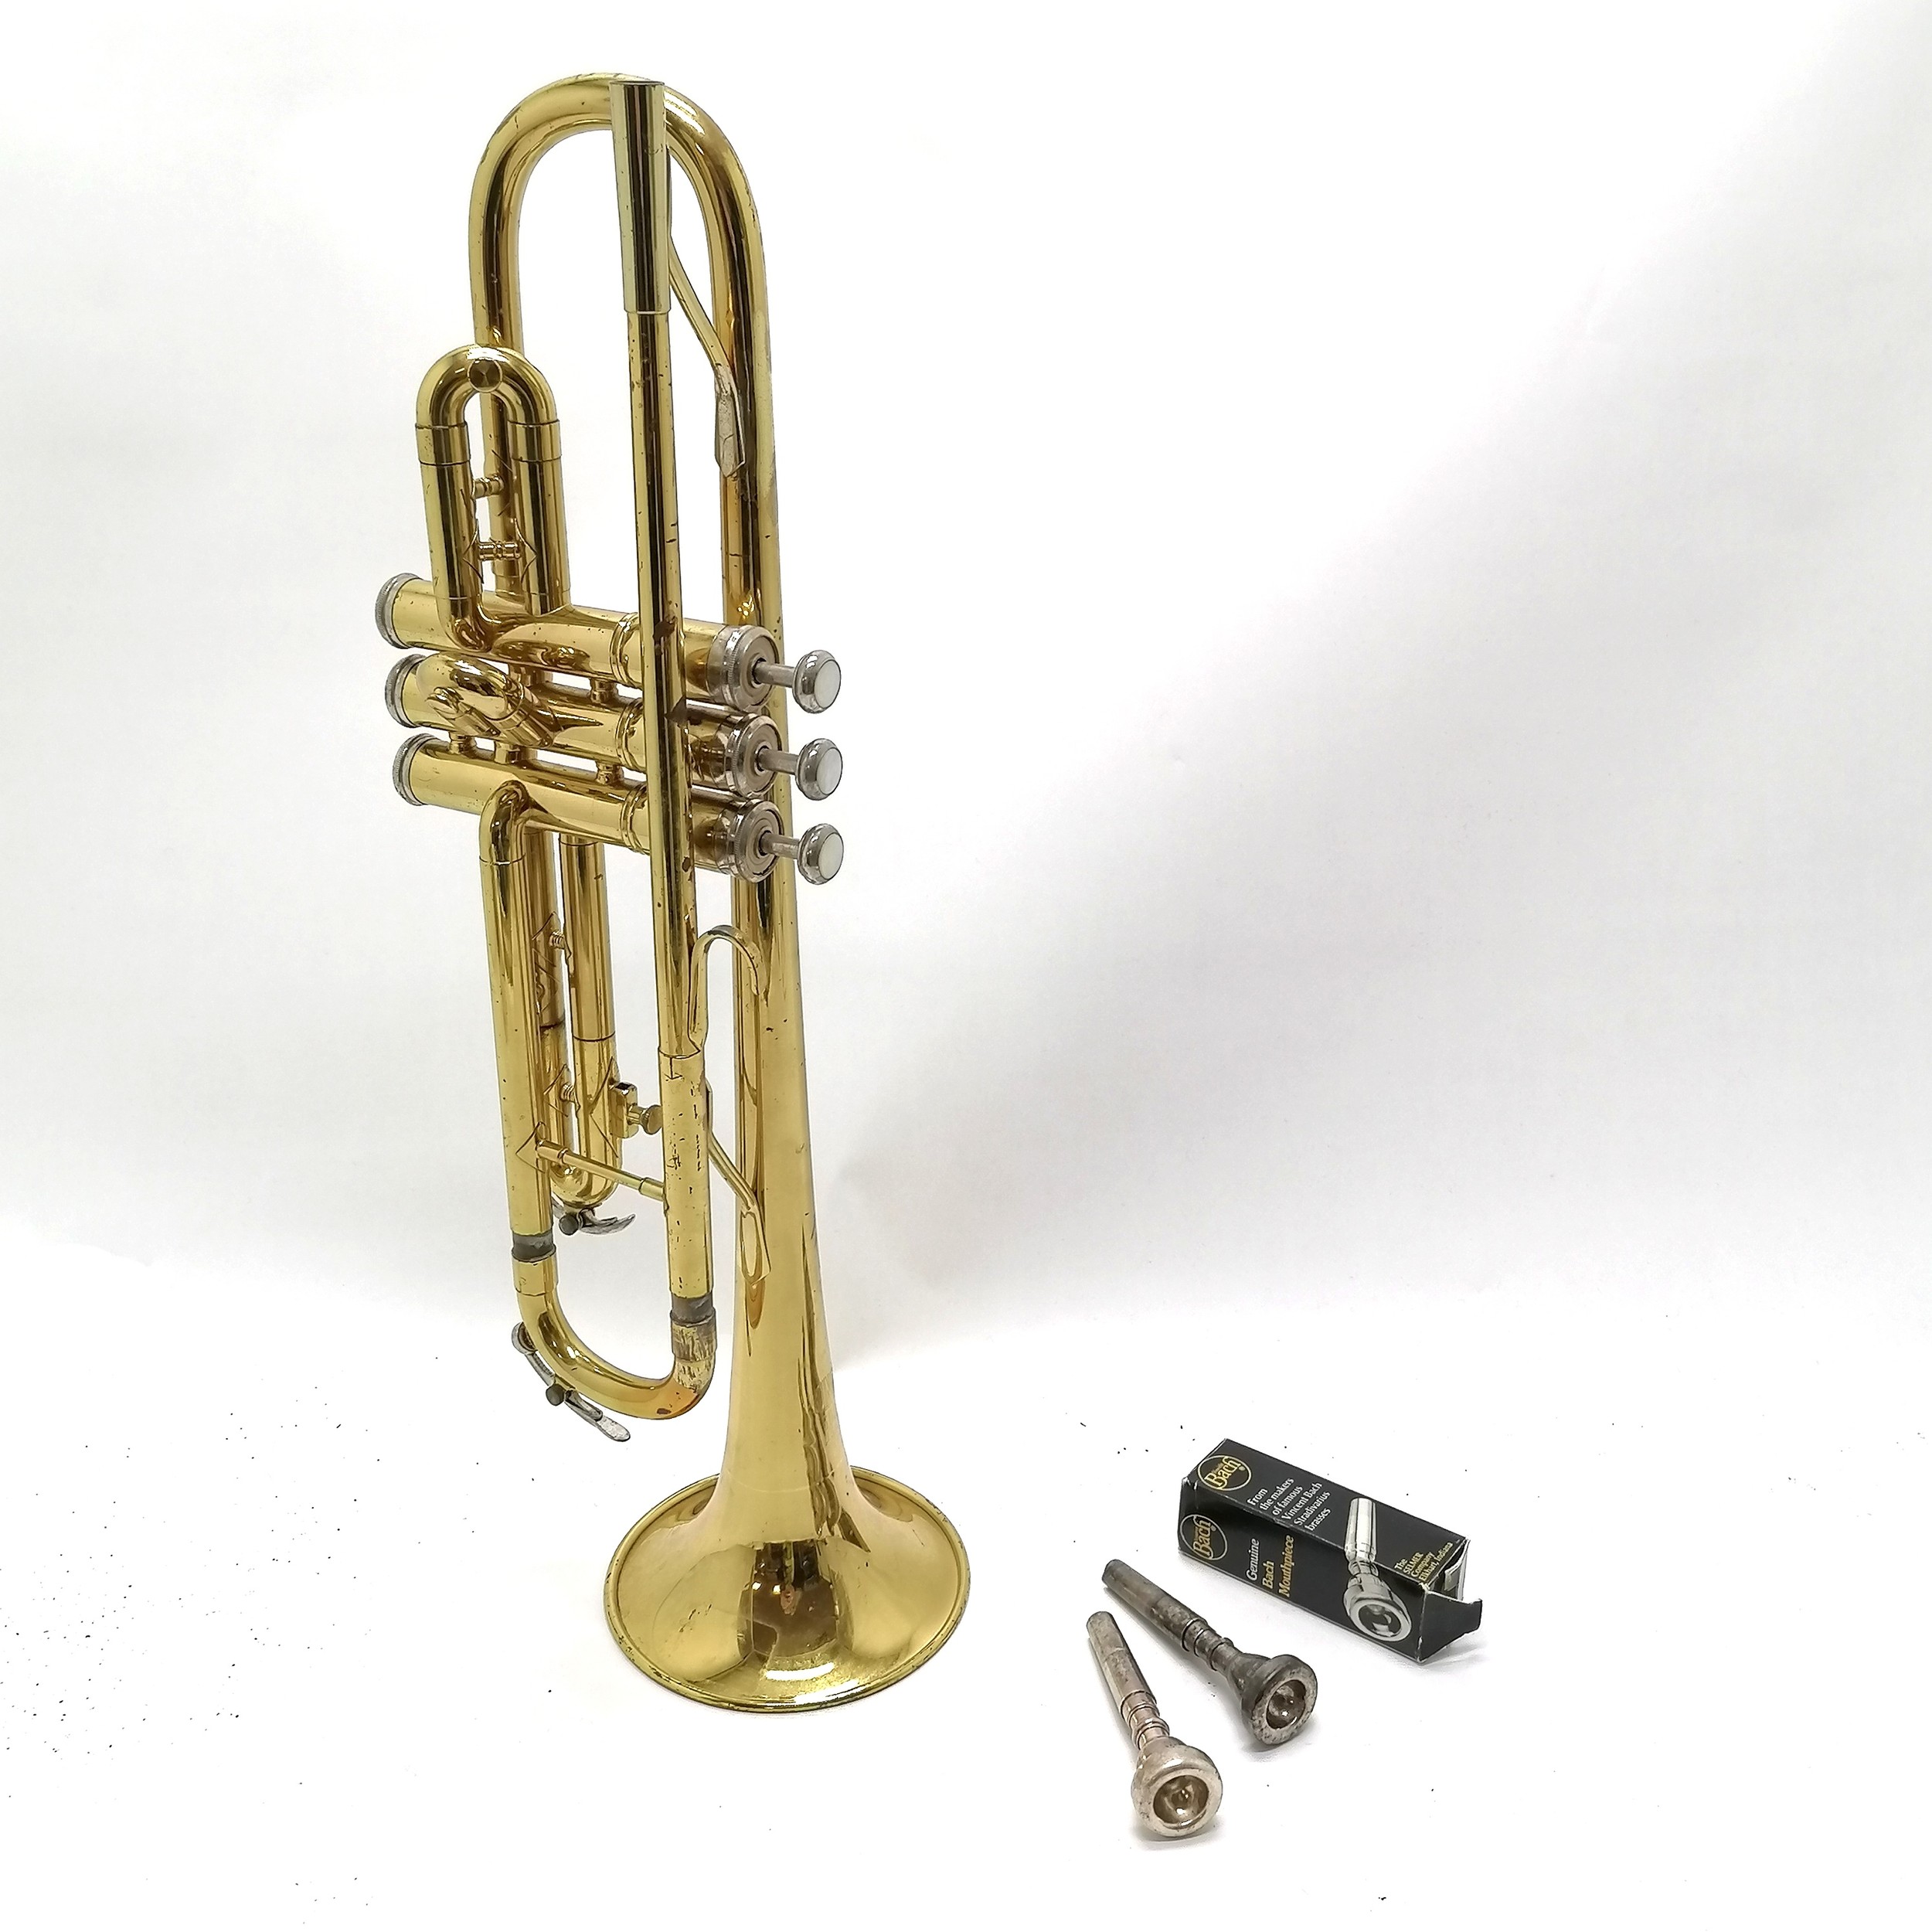 King 600 USA brass trumpet #458 with Holton & 7C mouthpieces in original carry case - Image 2 of 6